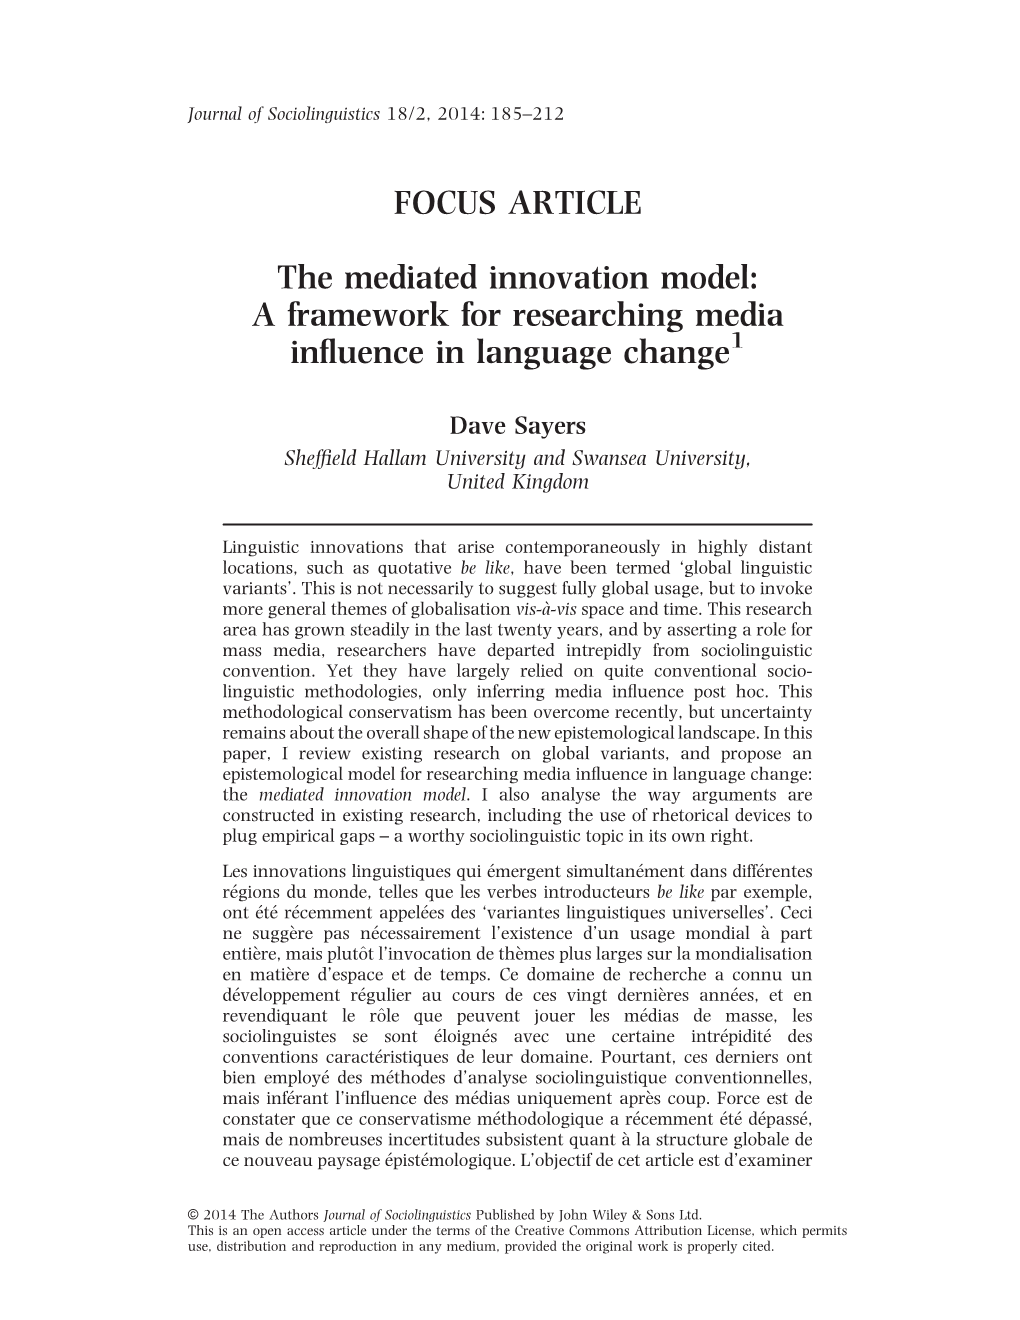 A Framework for Researching Media Influence in Language Change